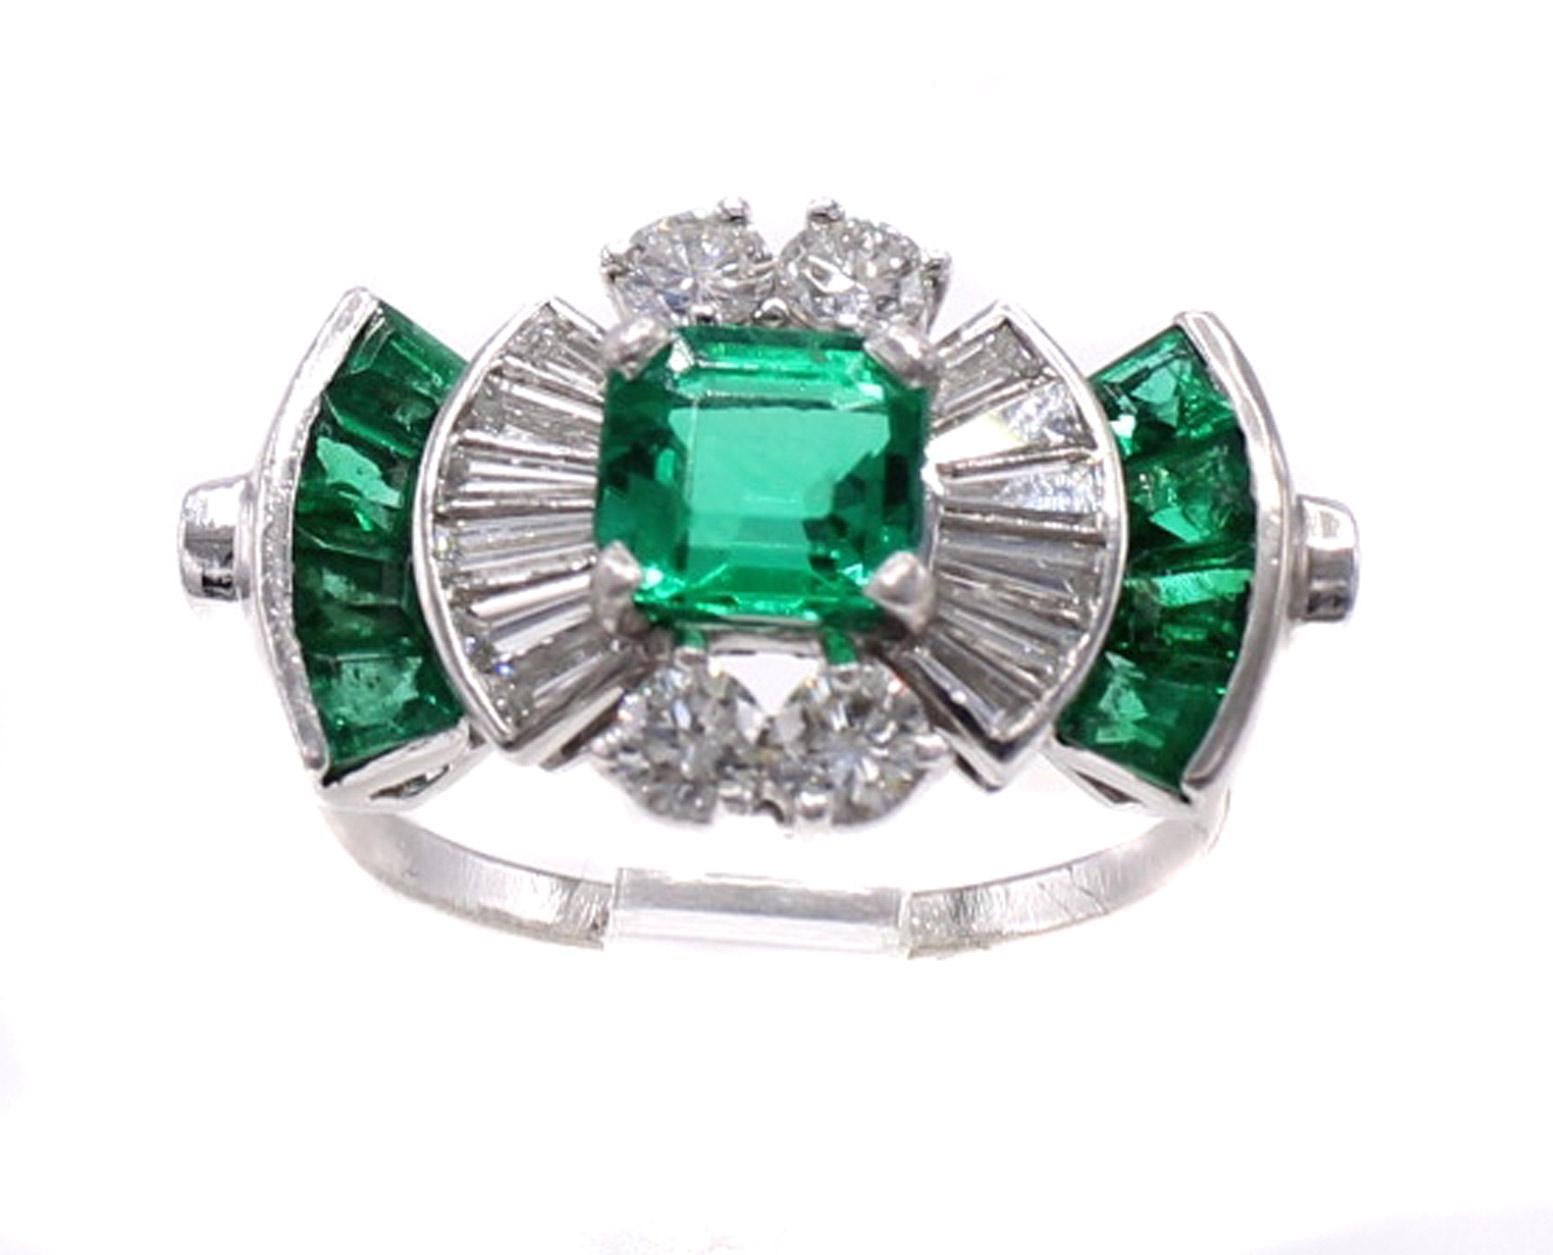 Beautifully designed and masterfully handcrafted in platinum by Americas most renown jeweler Tiffany & Co , this 1940s Retro ring displays a wonderful contrast of colors. The centerpiece of this amazing ring is a Colombian square step cut emerald